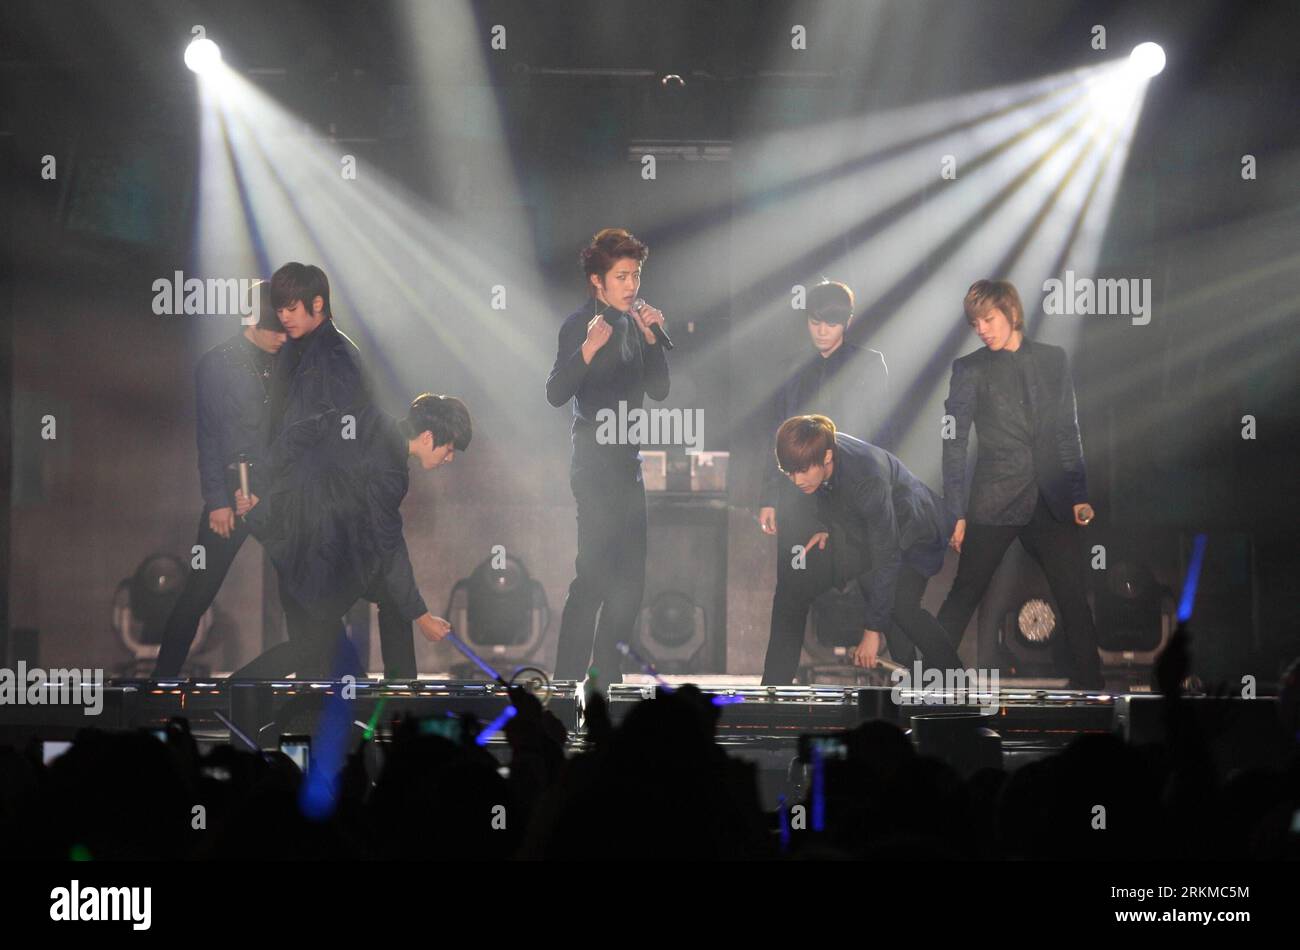 Bildnummer: 56675459  Datum: 09.12.2011  Copyright: imago/Xinhua (111209) -- SEOUL, Dec. 9, 2011 (Xinhua) -- South Korean group Infinite performs during a celebration for the K-pop World Festival 2011 at the Changwon velodrome in Changwon, South Korea, on Dec. 7, 2011. A global K-pop contest was held on Wednesday in Changwon, located some 398 kilometers southeast of Seoul, sending about 10,000 fans into a frenzy of excitement over the opportunity to see their beloved K- pop stars as well as contestants from around the world. (Xinhua/Park Jin Hee) (lr) SOUTH KOREA-CHANGWON-K-POP CONTEST PUBLICA Stock Photo